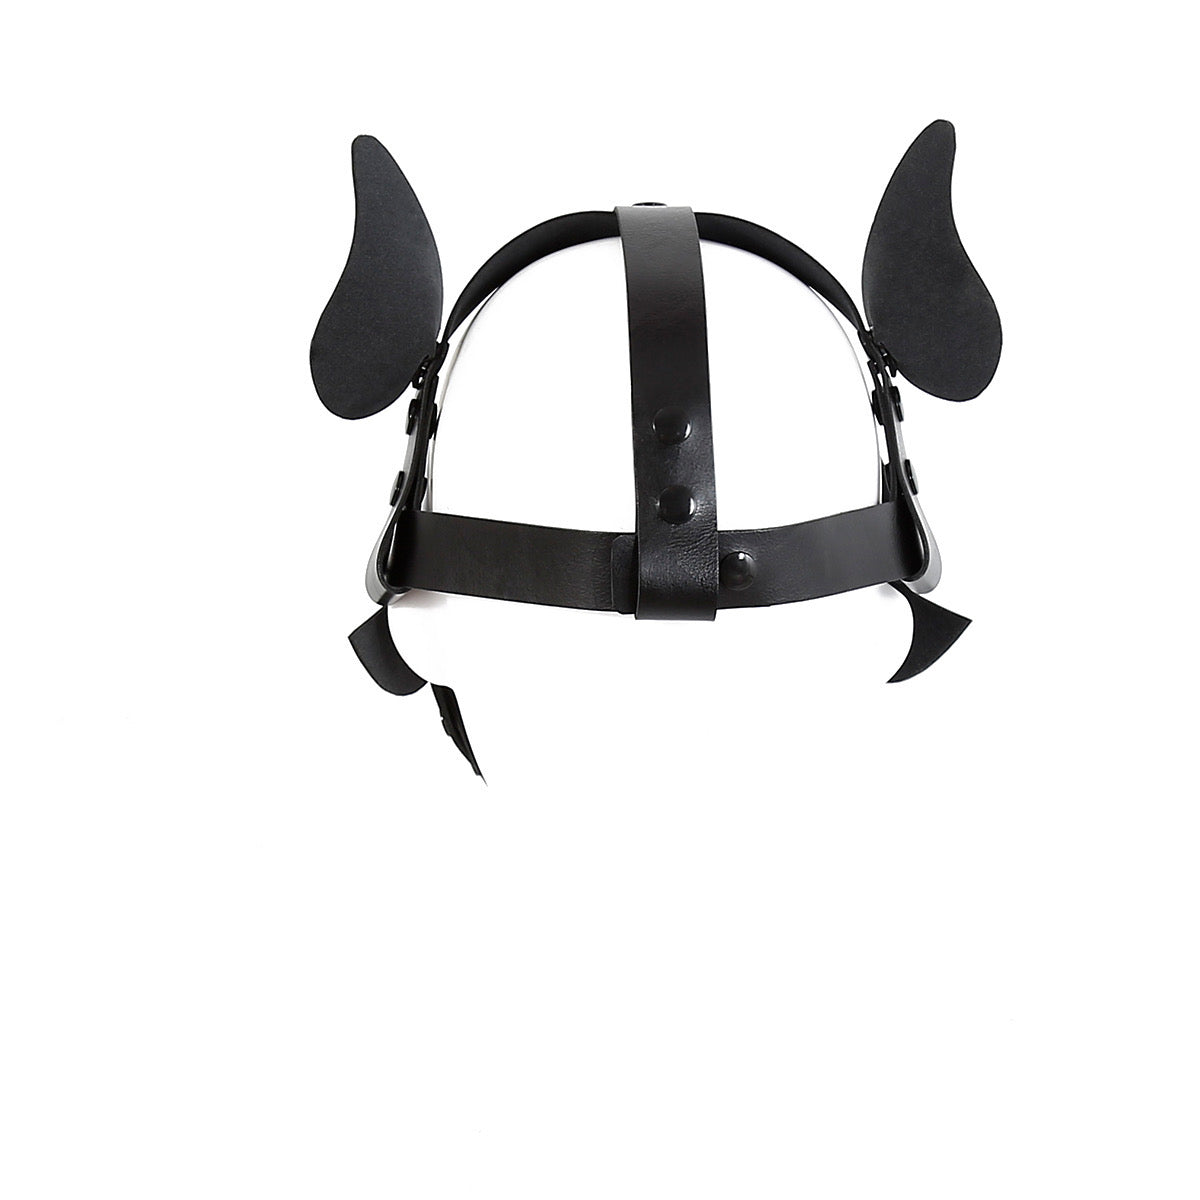 MEN’S PU LEATHER PUP PLAY MASK